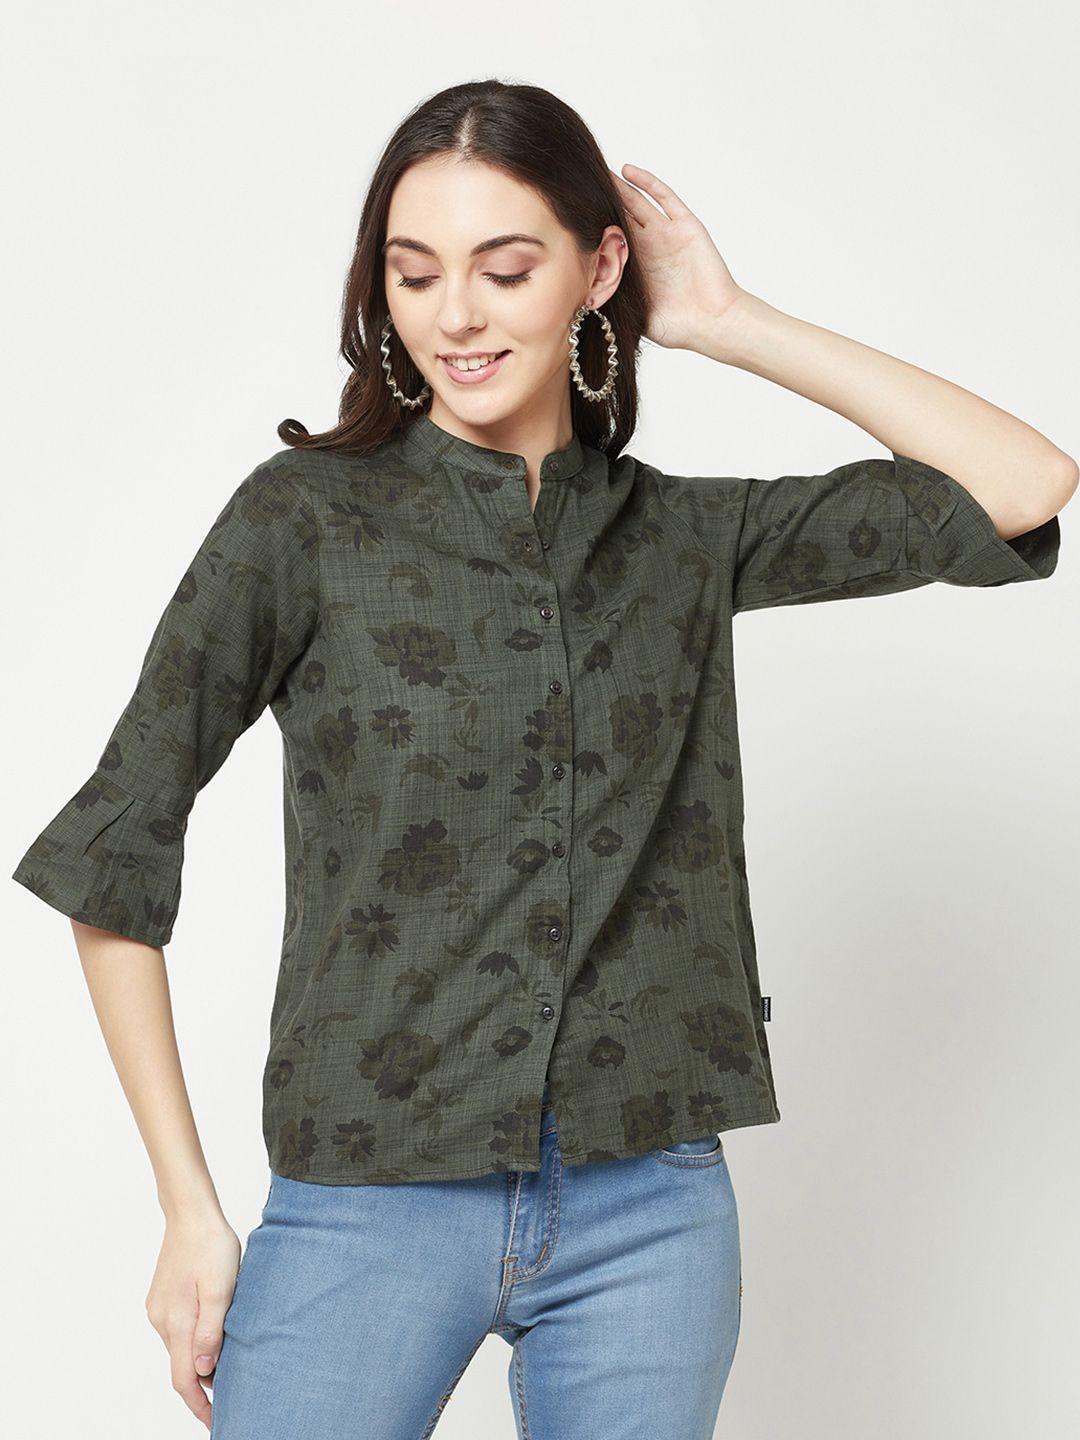 crimsoune-club-floral-printed-slim-fit-band-collar-bell-sleeves-casual-shirt